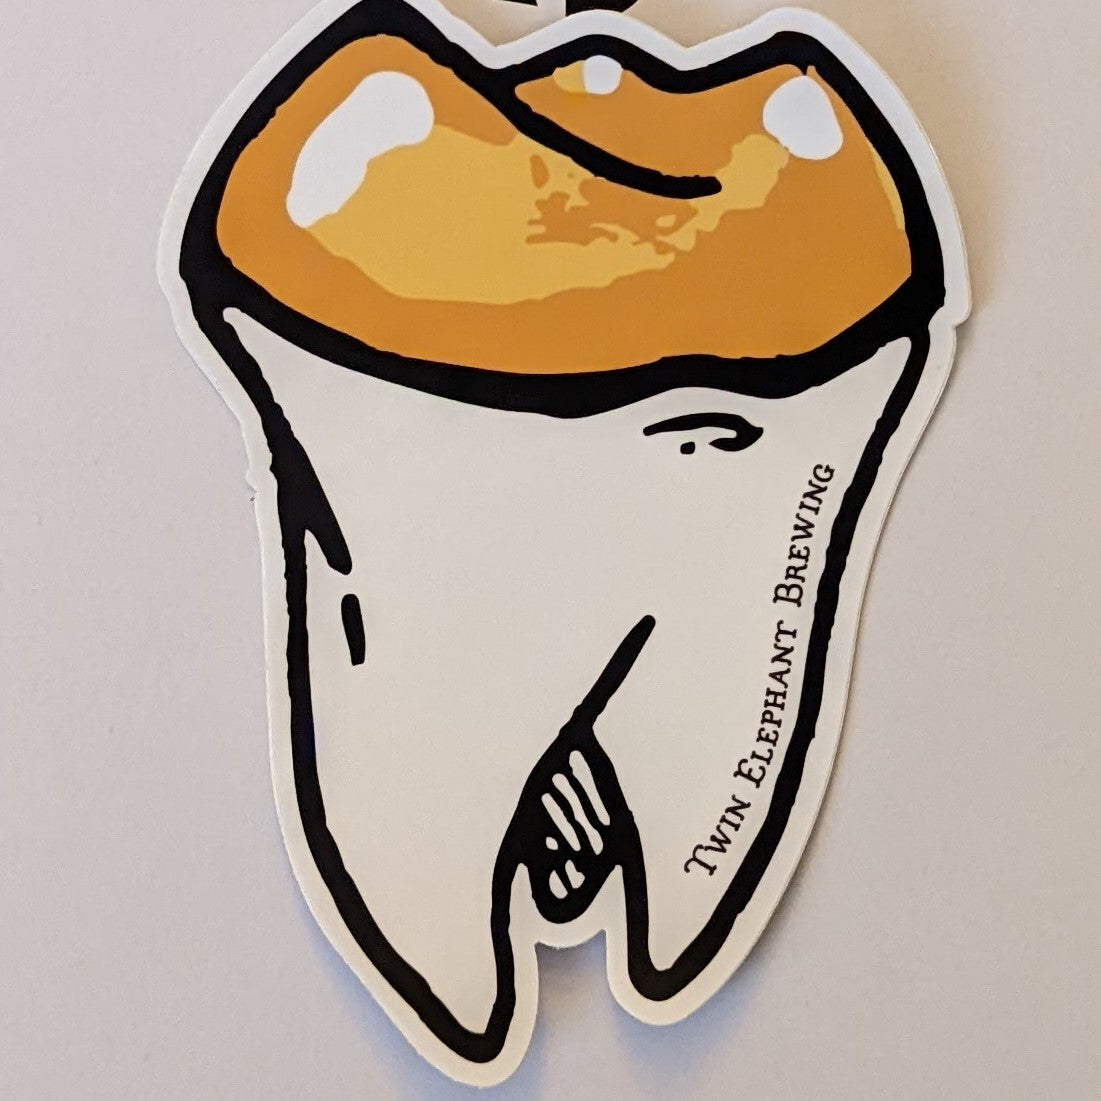 Stickers - Lil' Shimmy Ye' Tooth Large